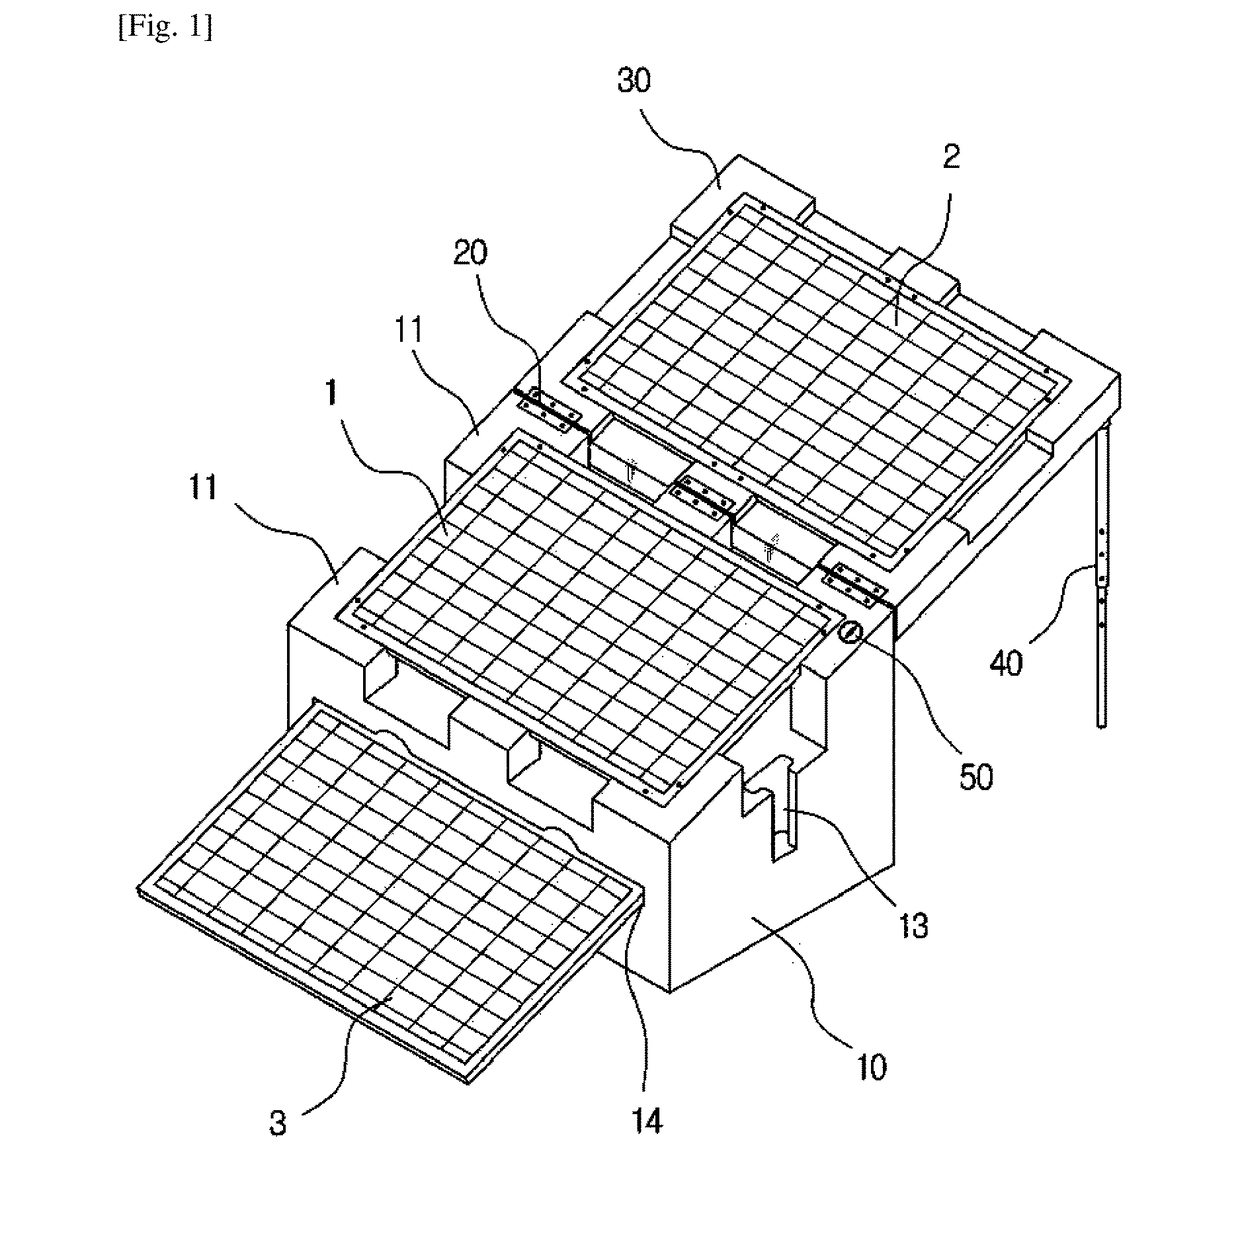 Extended photovoltaic module fixture